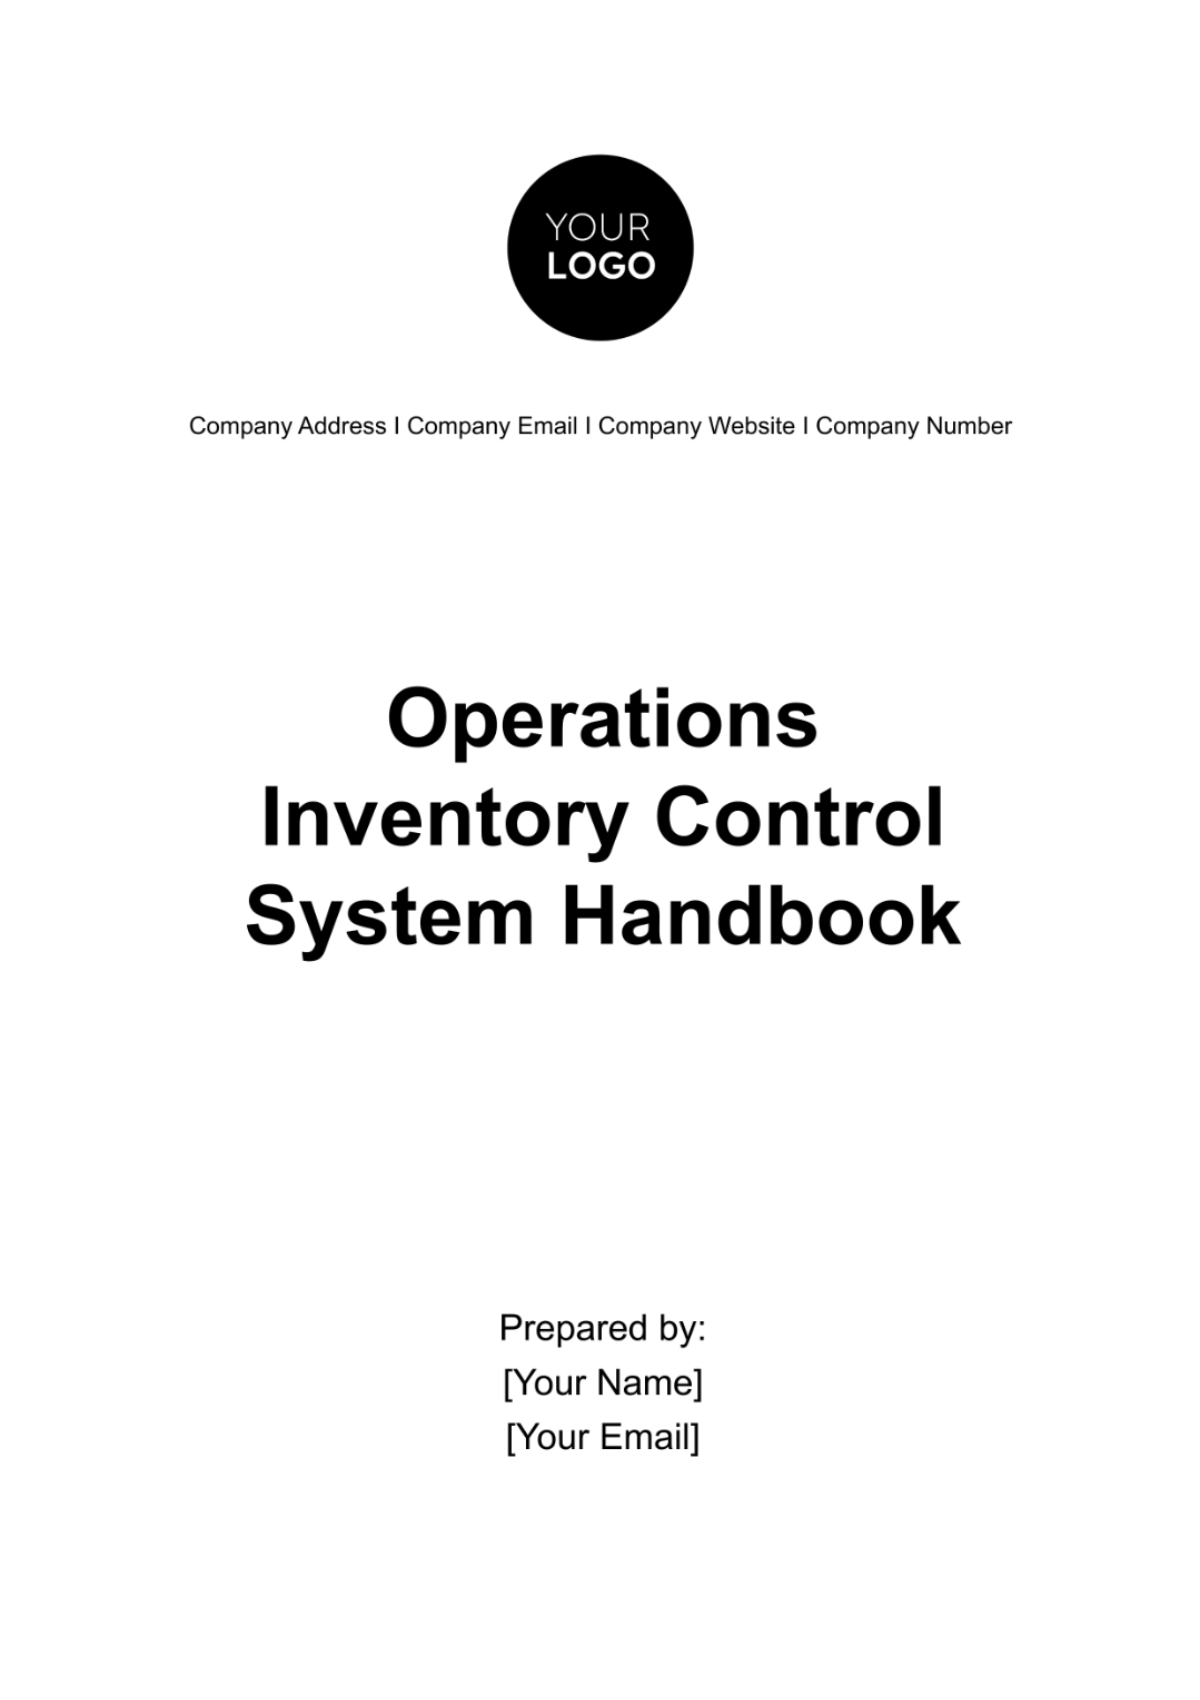 Operations Inventory Control System Handbook Template